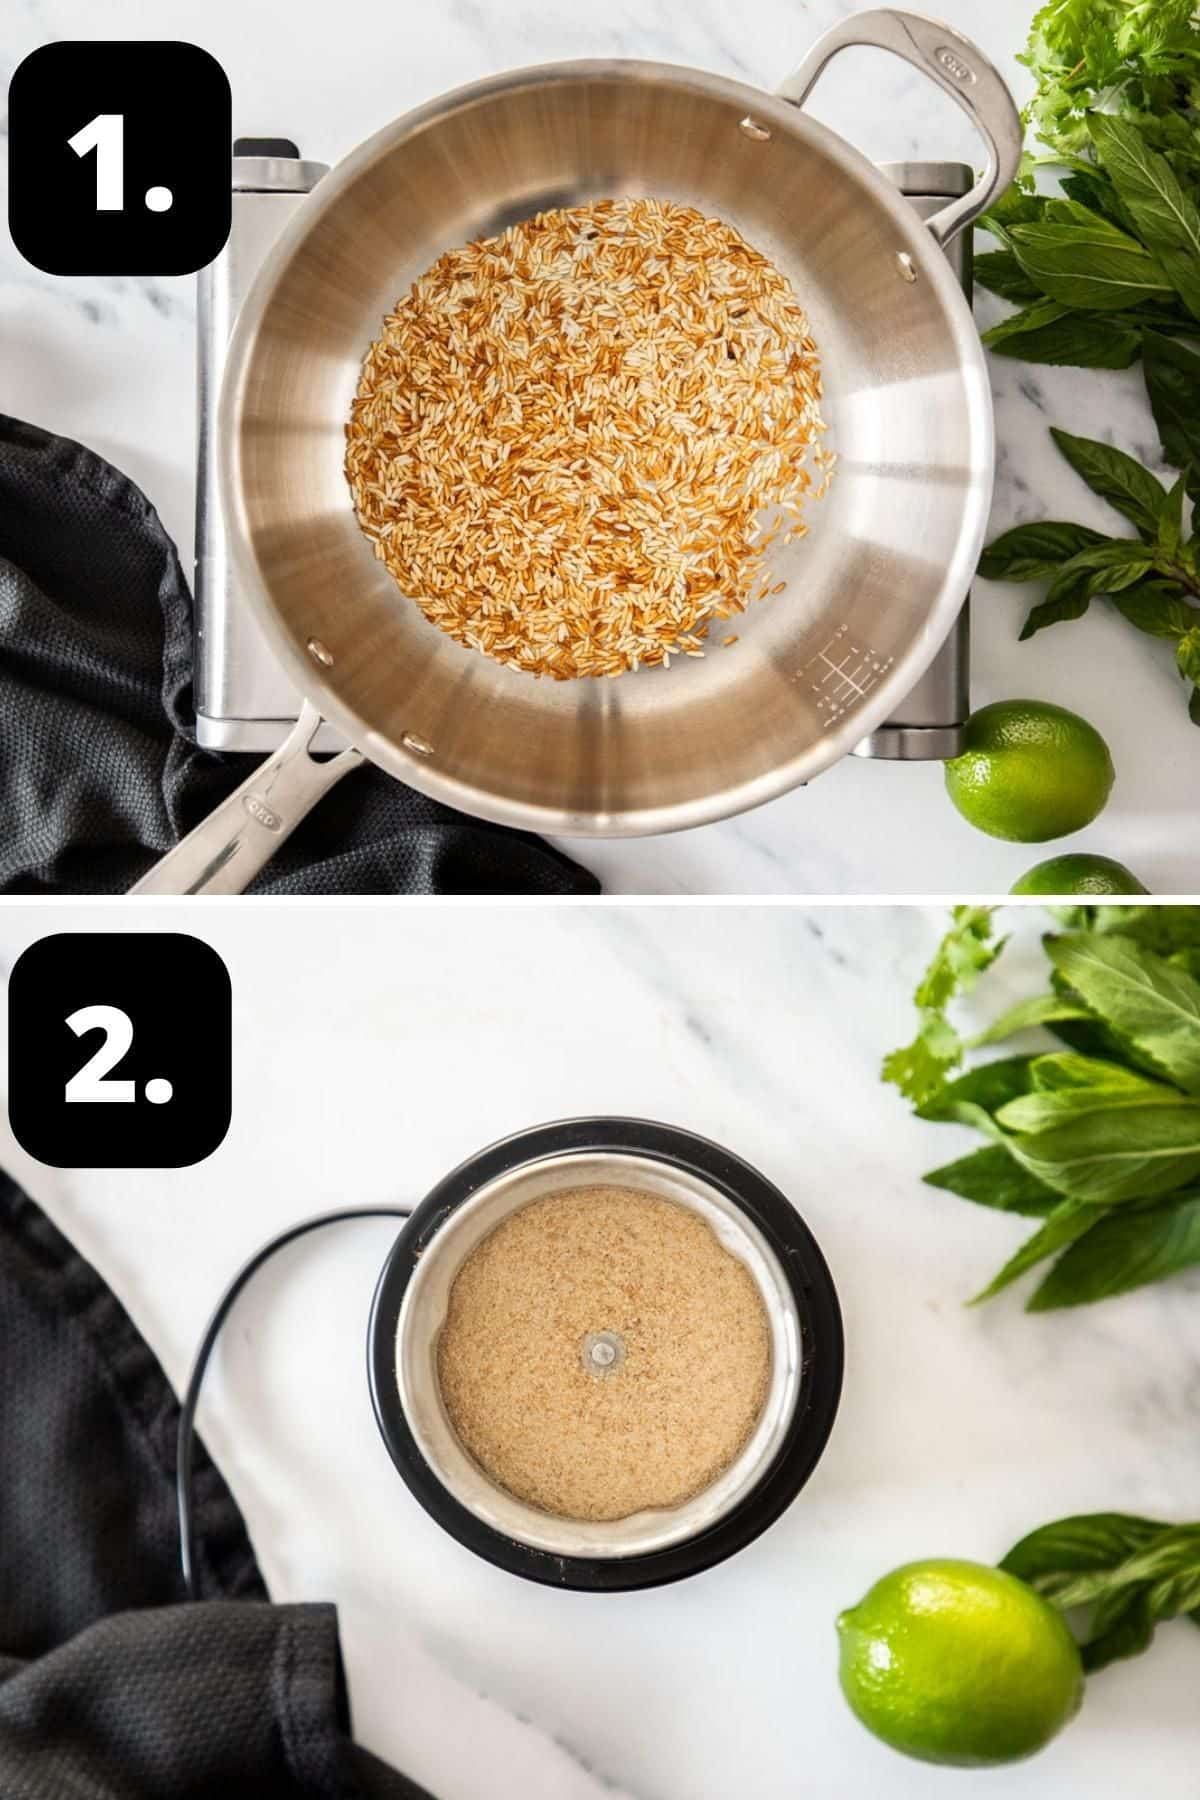 Steps 1-2 of preparing this recipe - toasting the rice and grinding it to a powder in a small blender.